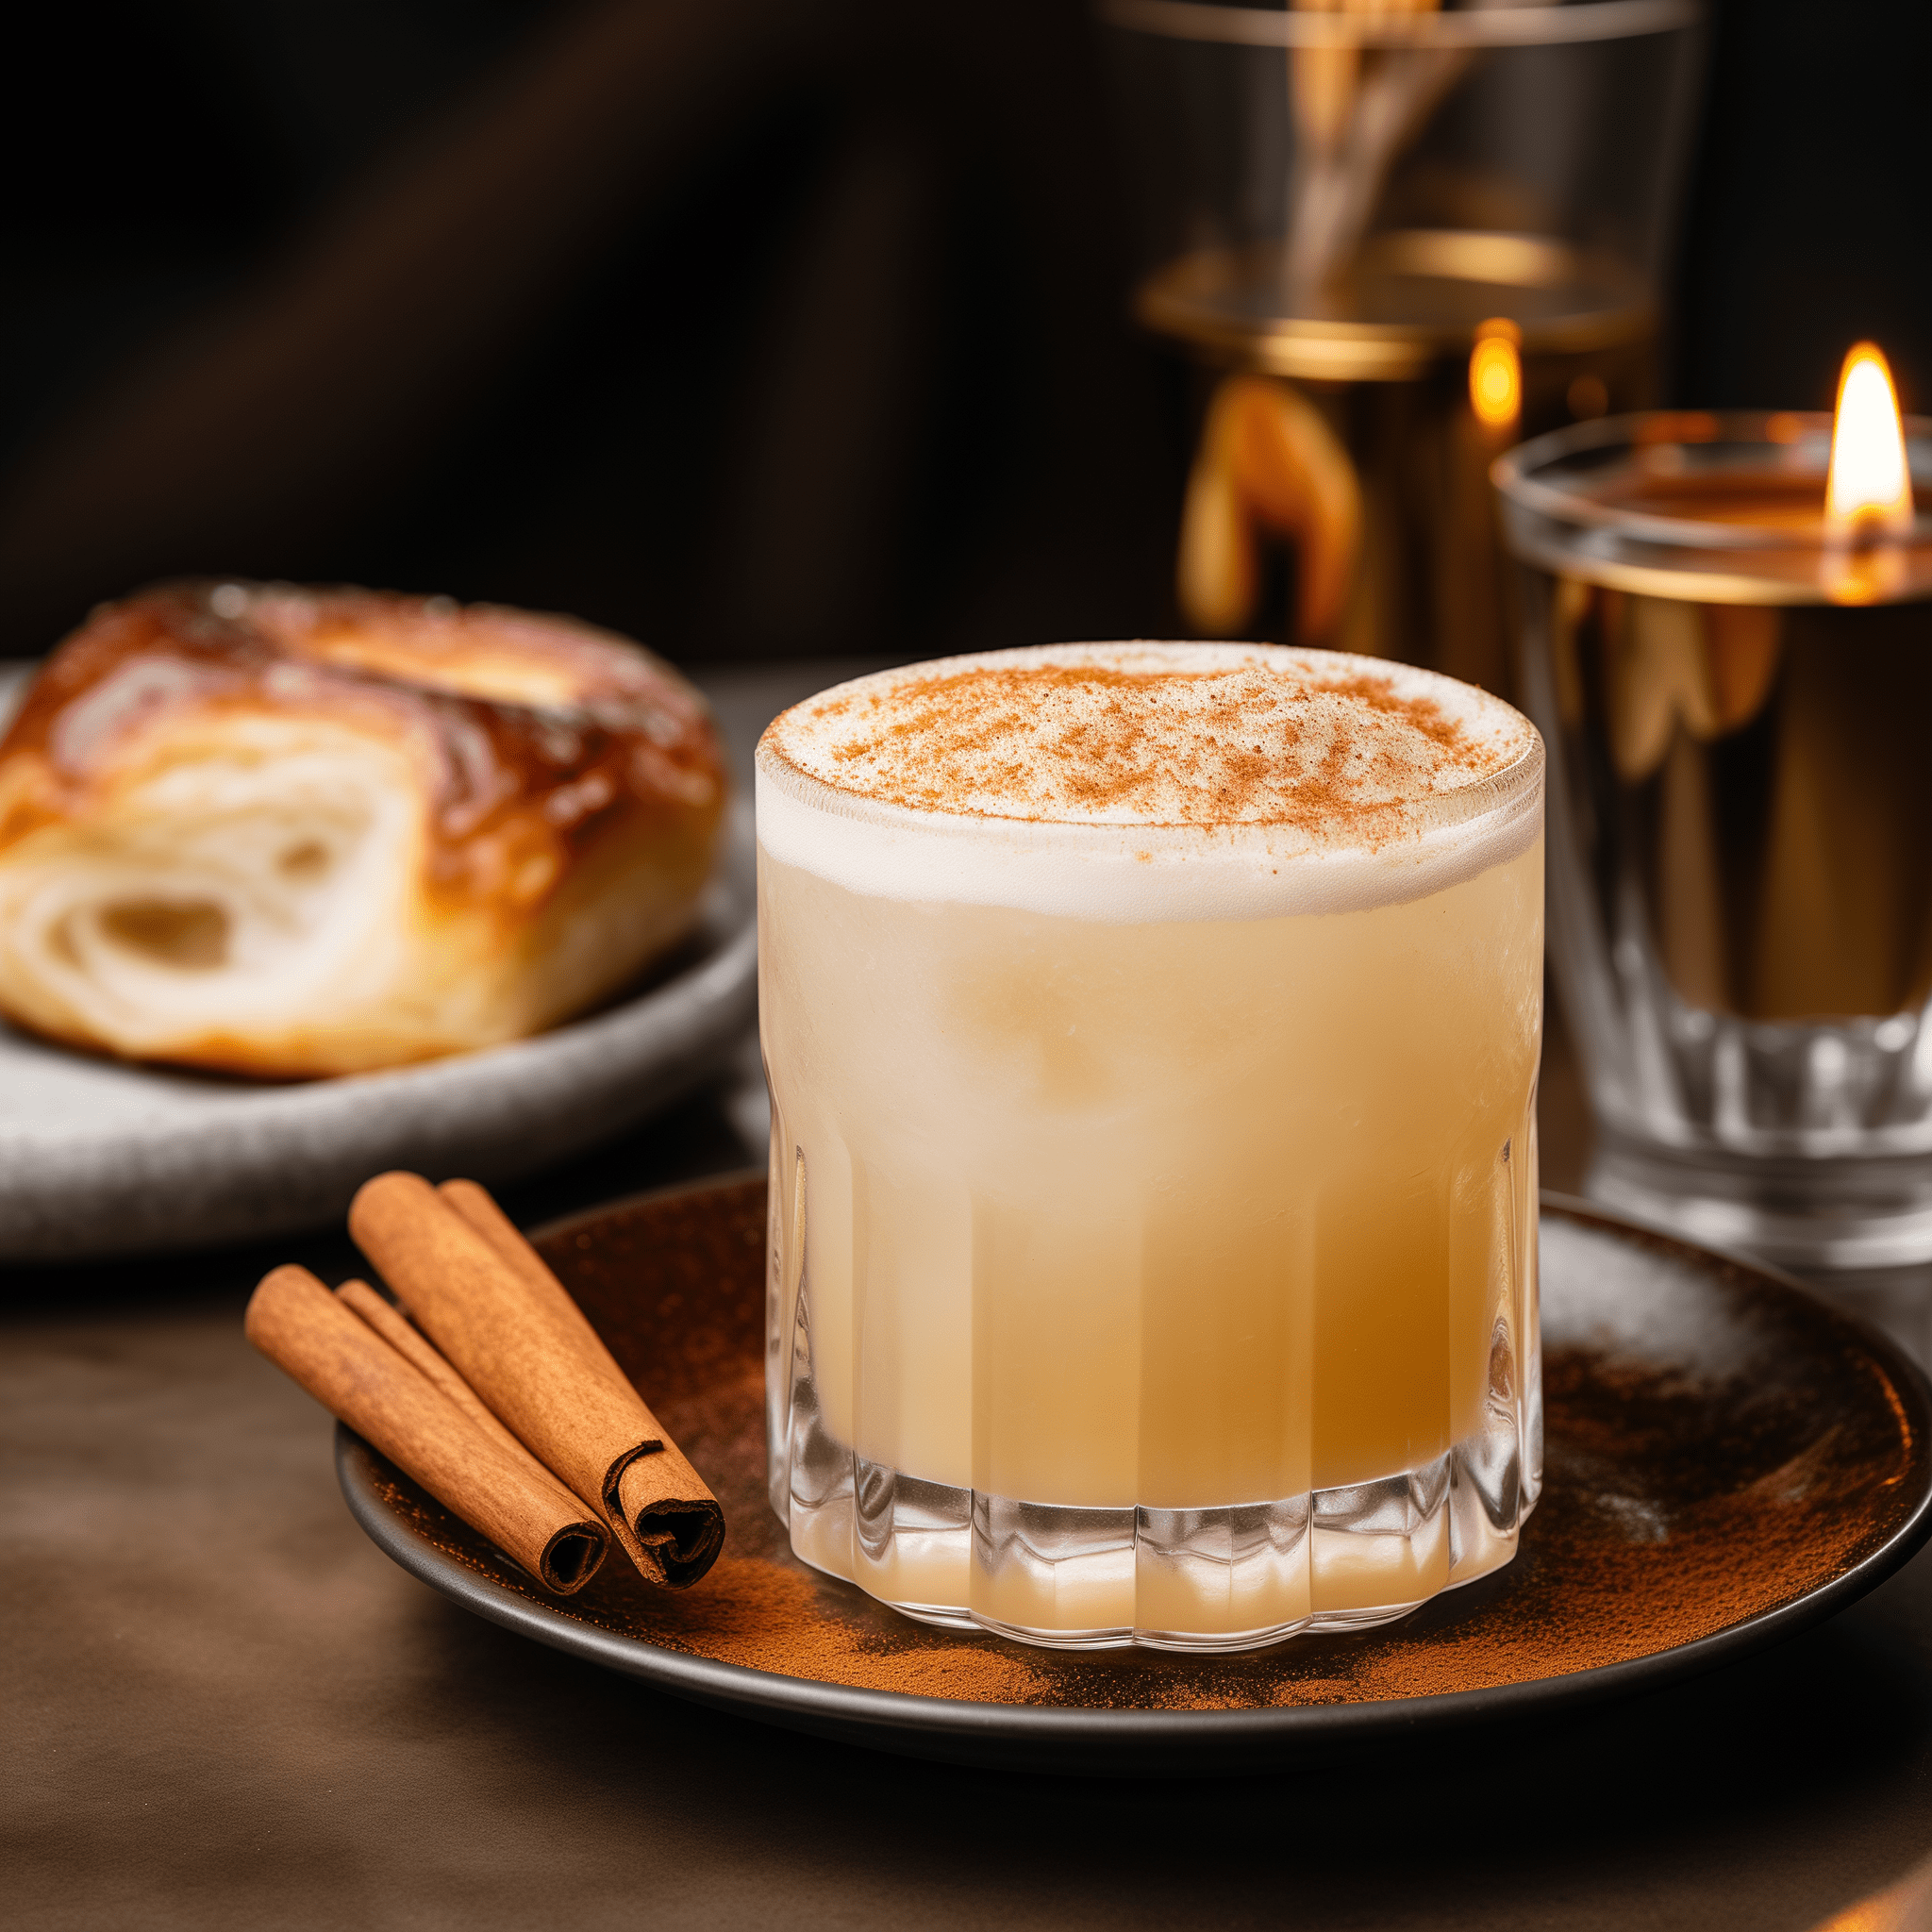 Cinnamon Roll Cocktail Recipe - The Cinnamon Roll Cocktail is a sweet, creamy concoction with a warm cinnamon spice that lingers on the palate. It's rich and velvety, with a delightful balance between the sweetness of the liqueurs and the boldness of the cinnamon.